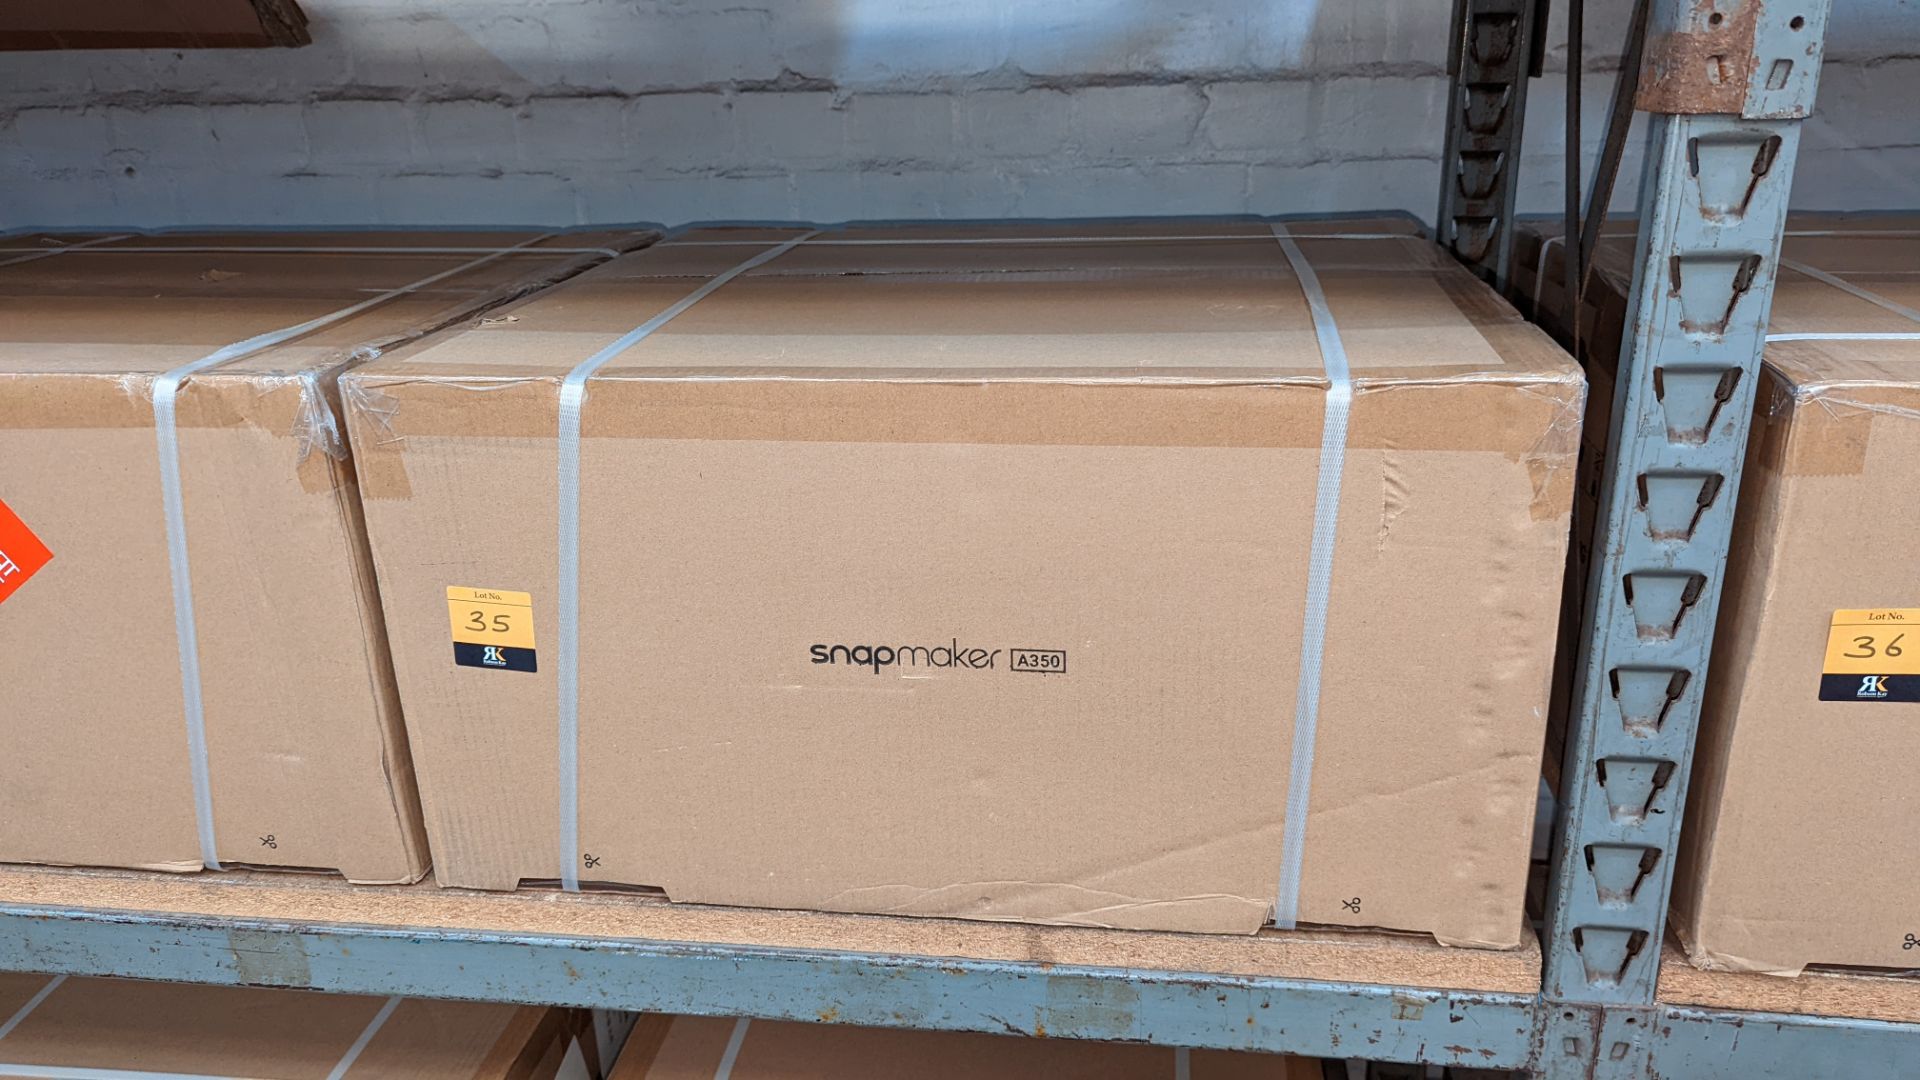 Snapmaker model A350 3D printer - boxed, delivered with original banding, assumed to be new/unused